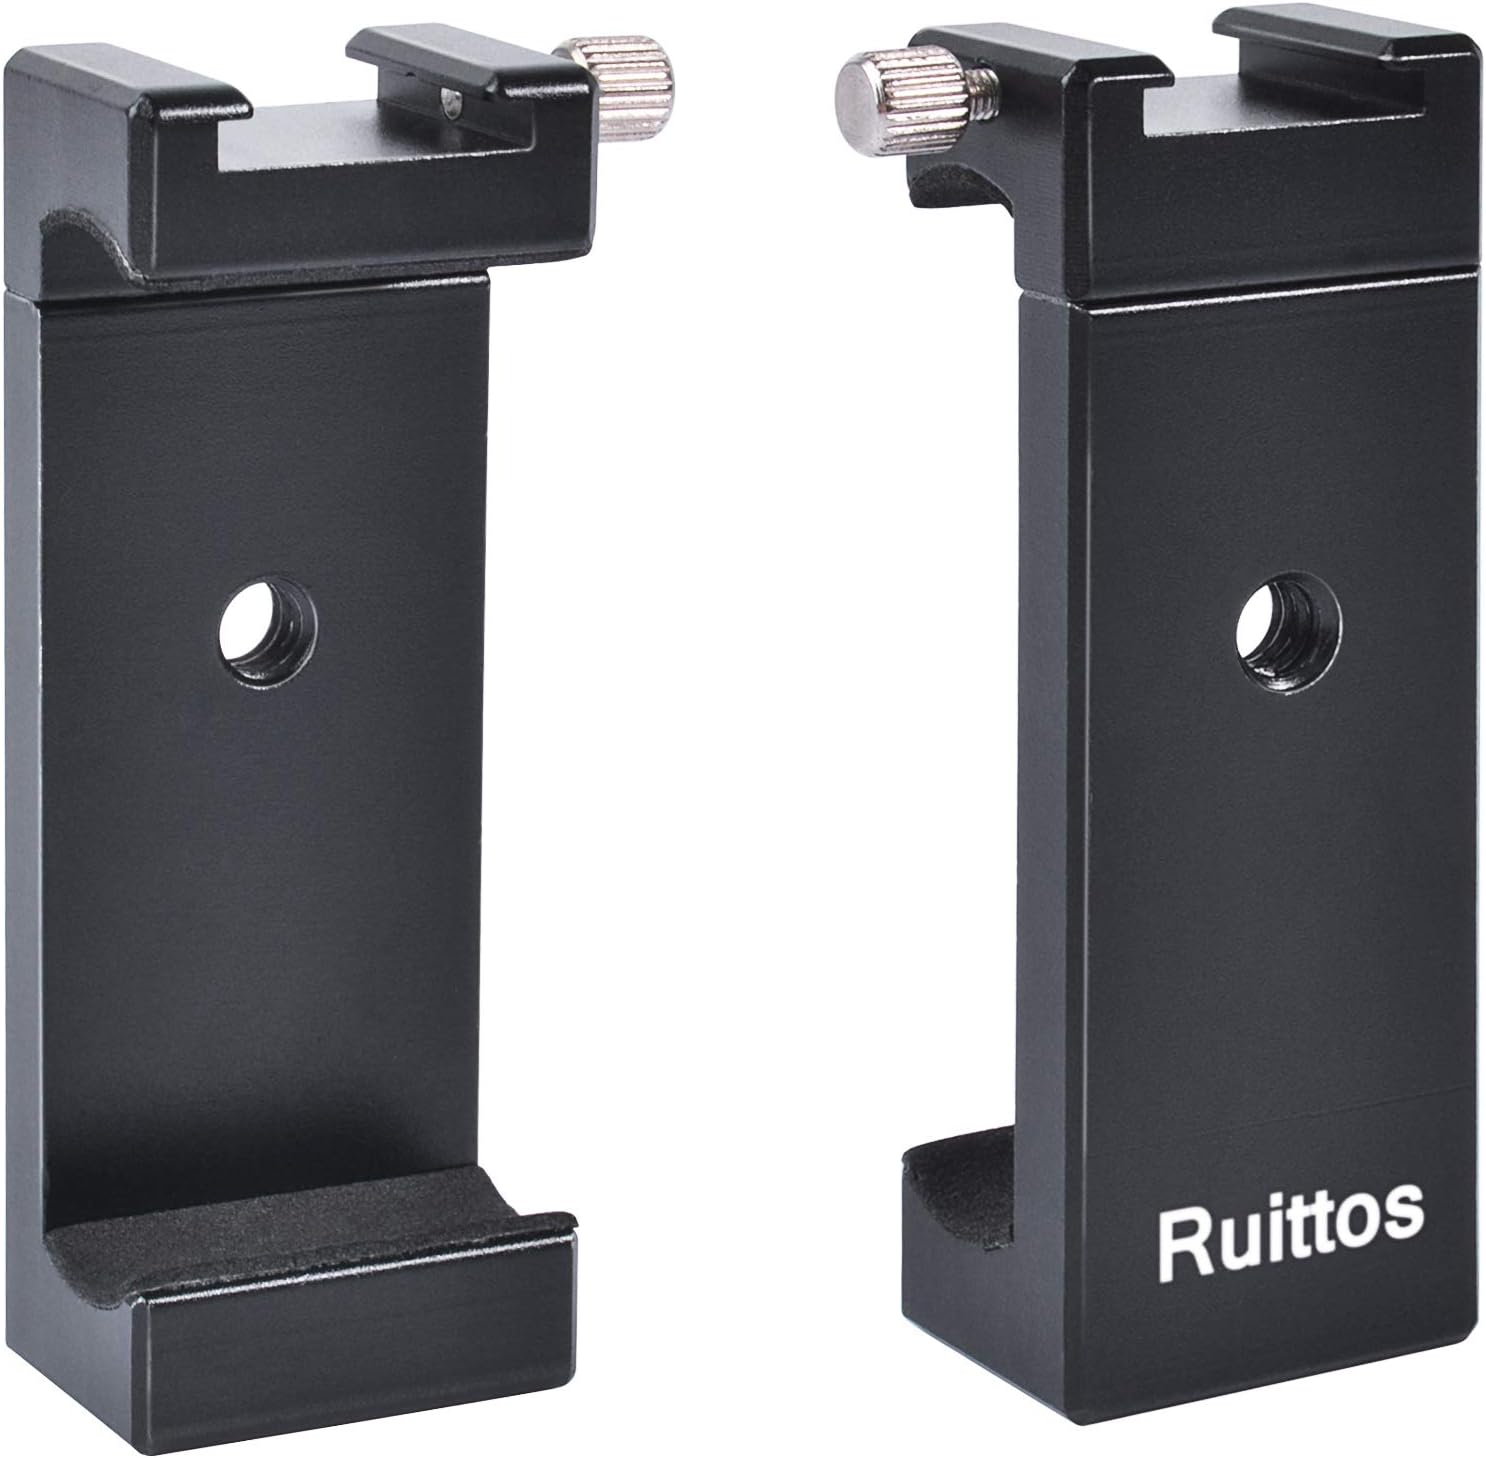 Ruittos Metal Phone Tripod Mount with Remote, [...]